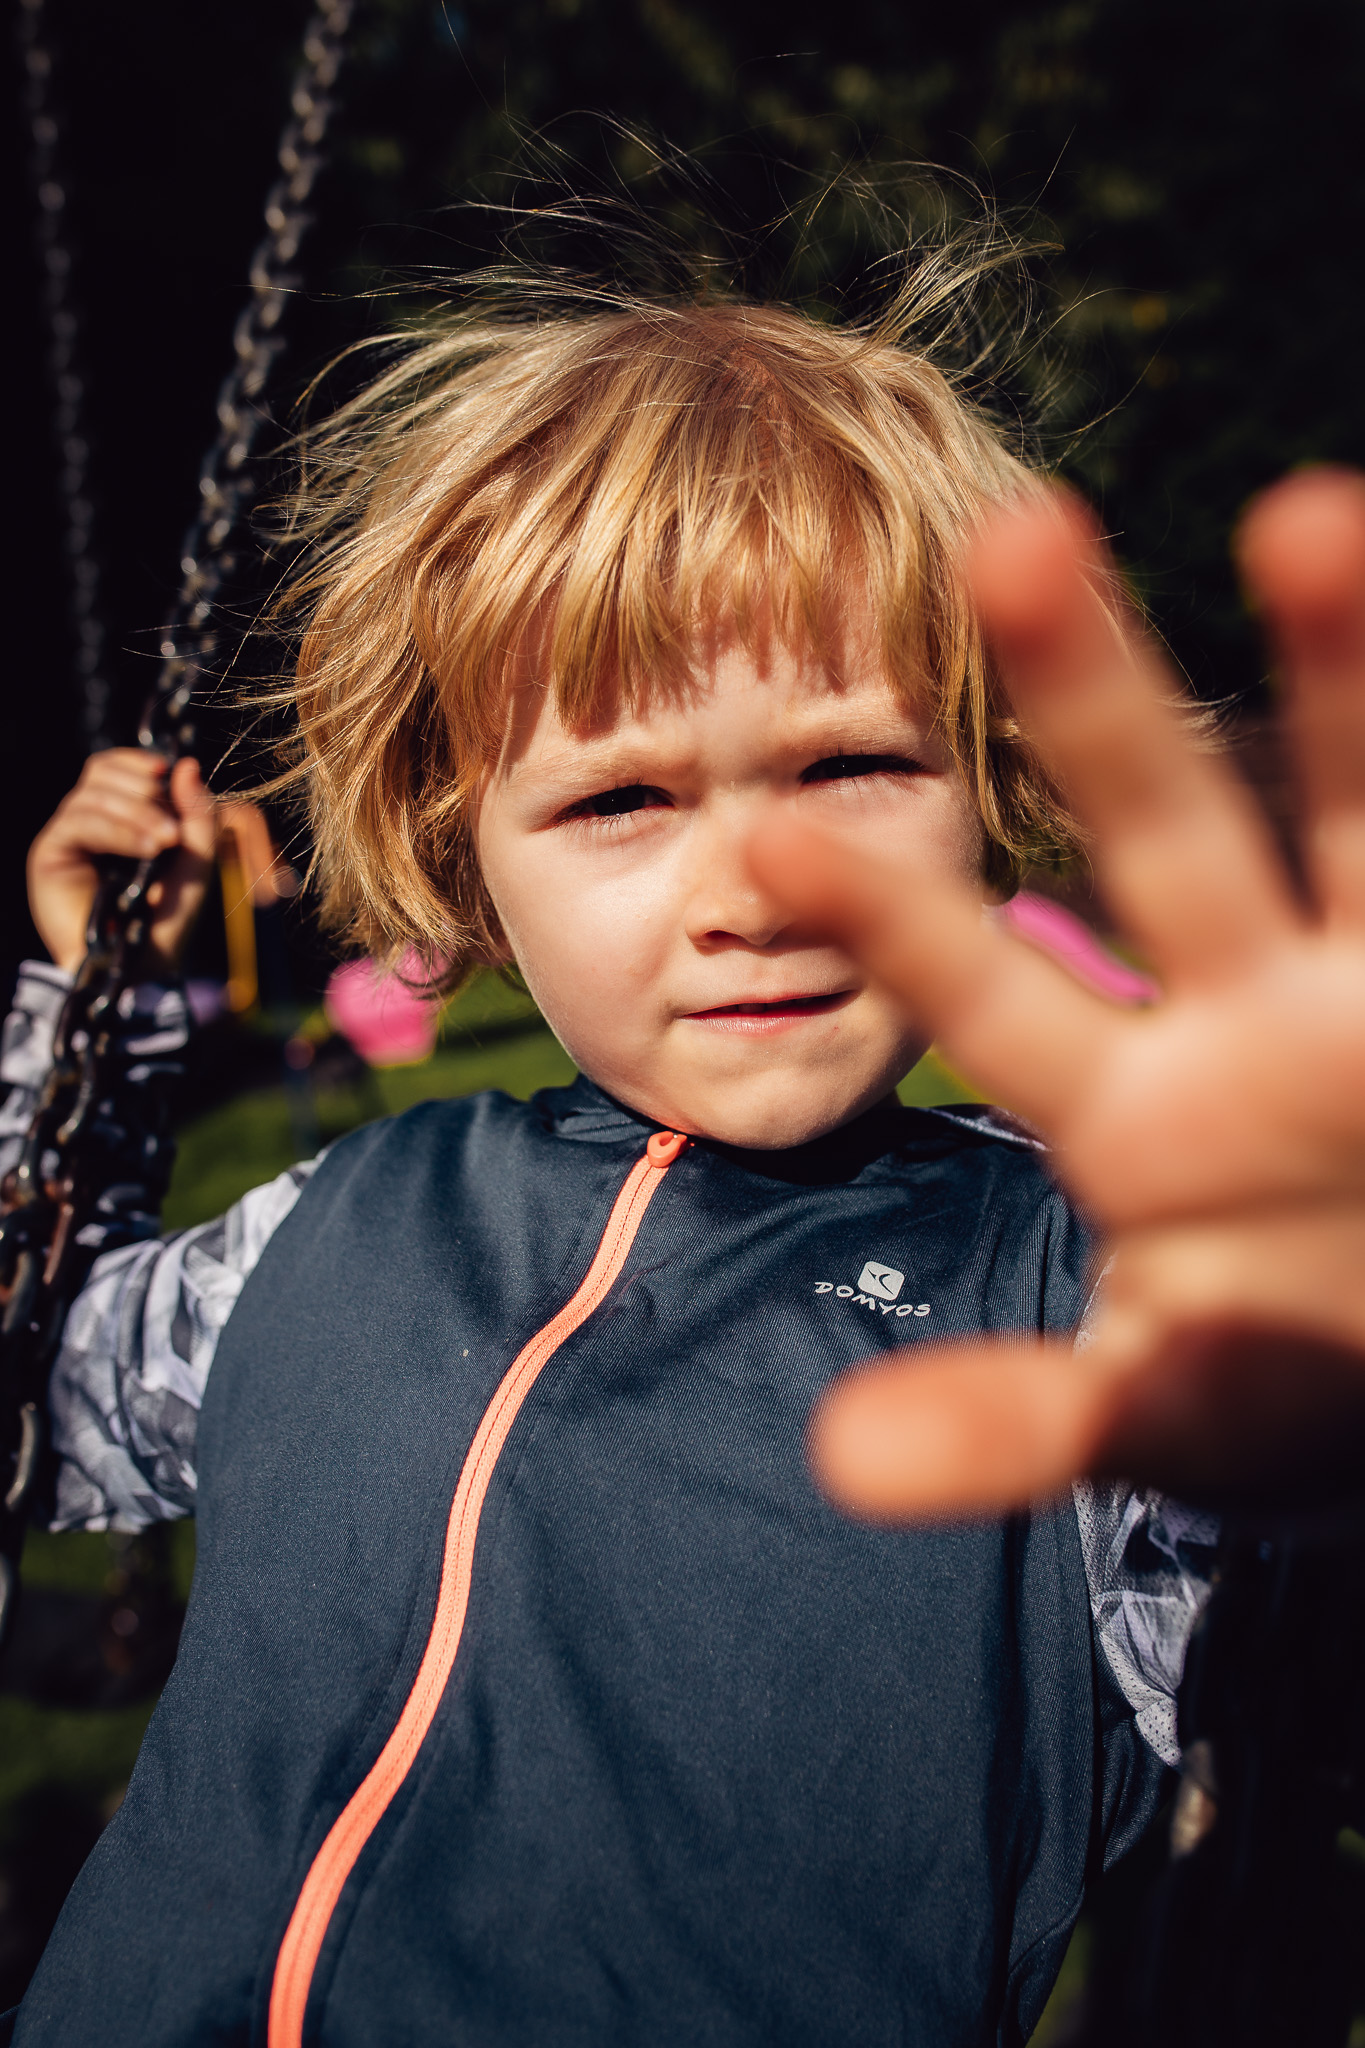 Young boy reaching out to cover his face on a swing during a family photo session.